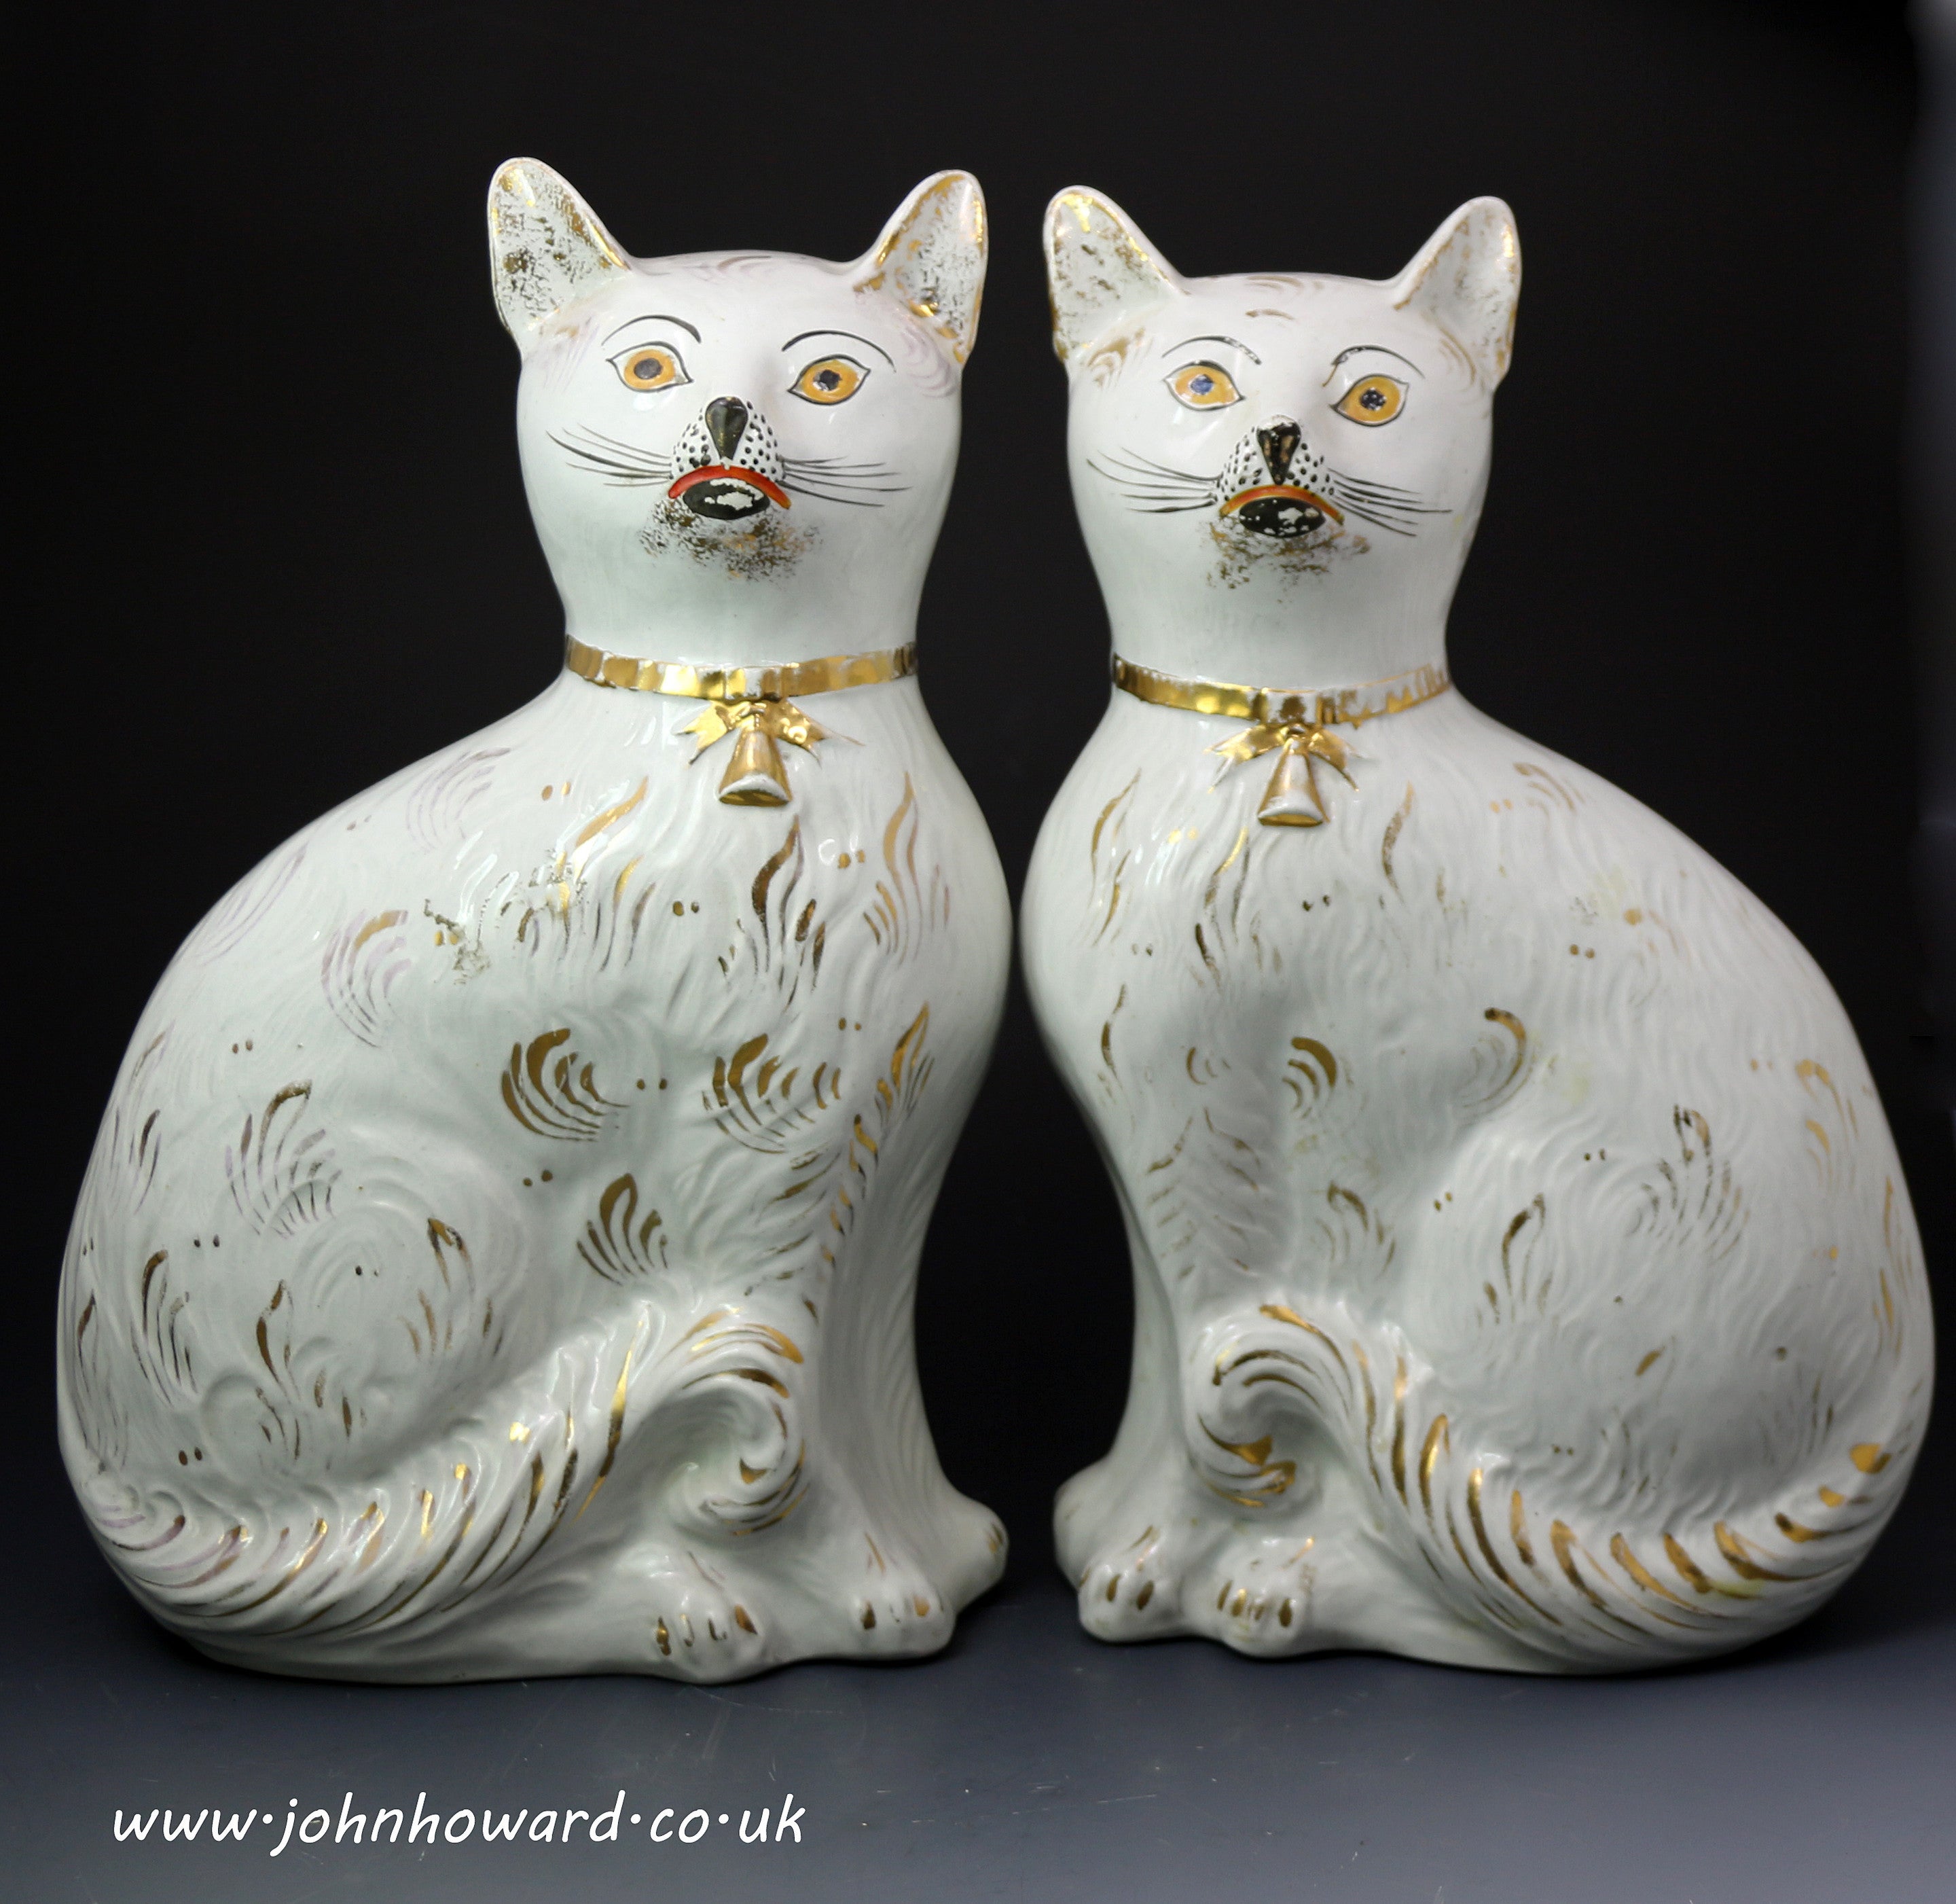 Pair of Scottish Pottery Figures of Seated Cats with Gold Collars, circa 1880 